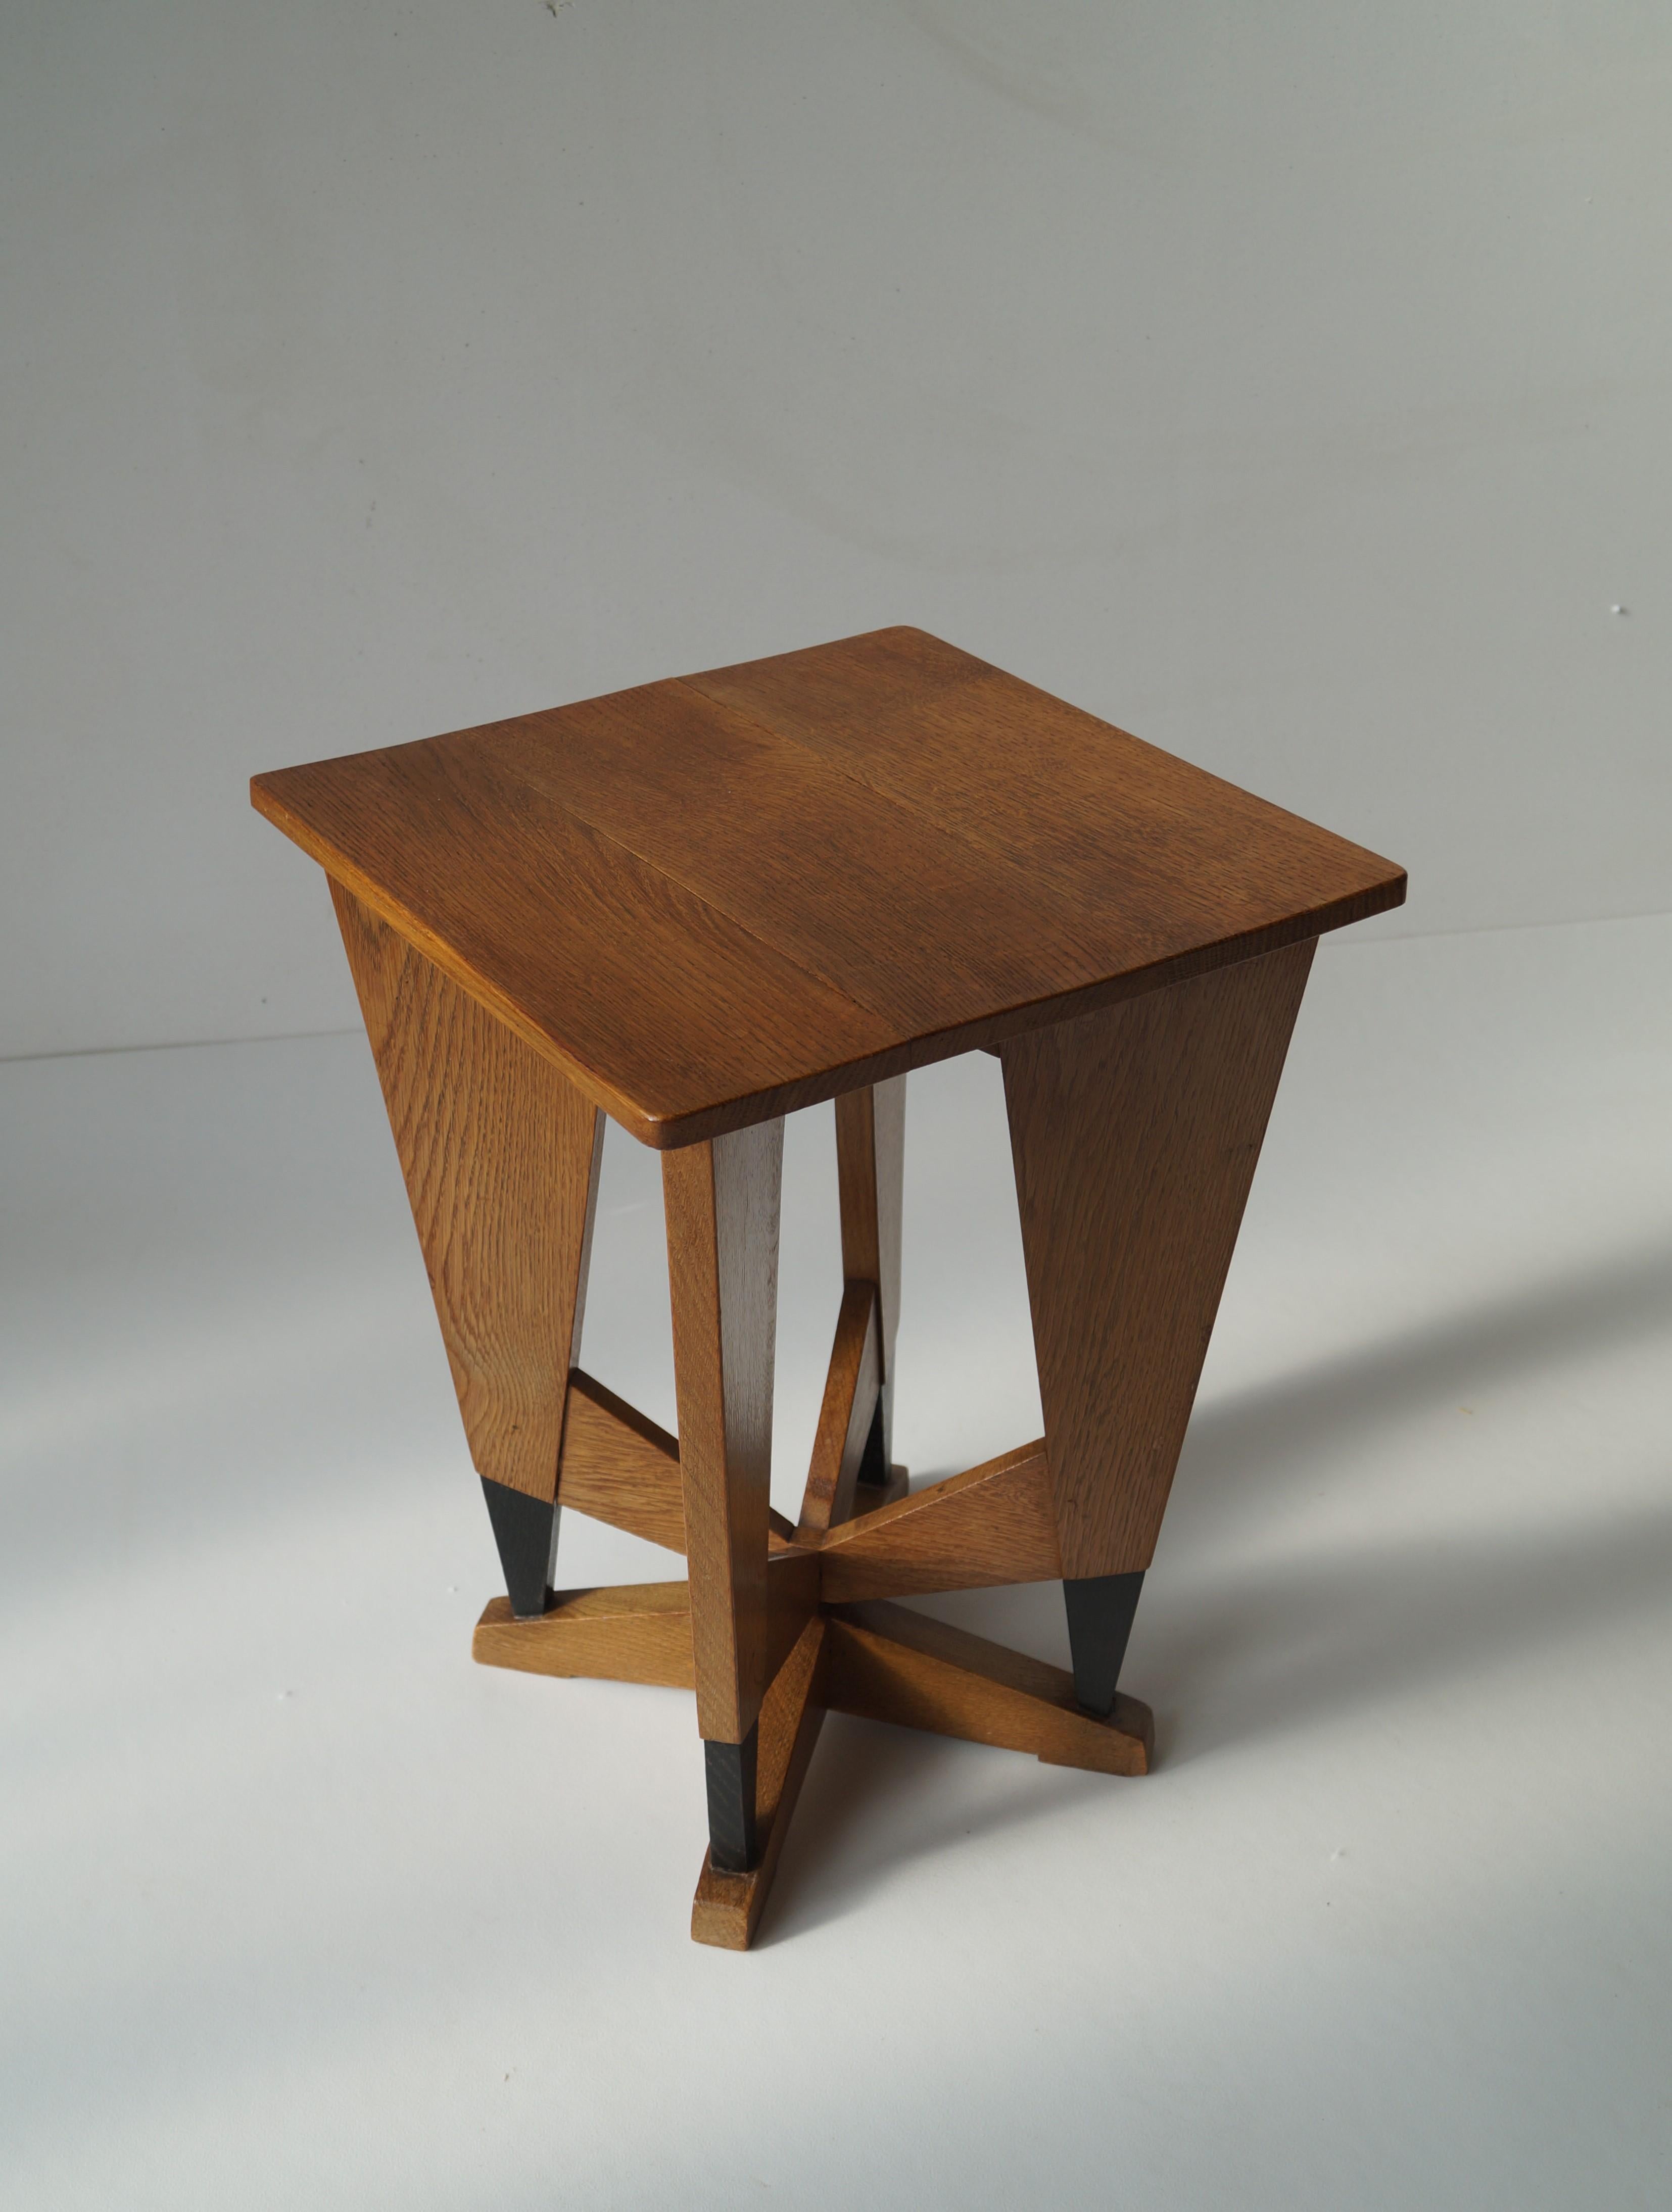 Architectural and eye catching occasional table from the Dutch Art Deco era, 1920s. Designed by P.E.L. Izeren for De Genneper Molen. 
The table has a modernist or ''Haagse School'' design.  This modestly sized table with its intricate designed